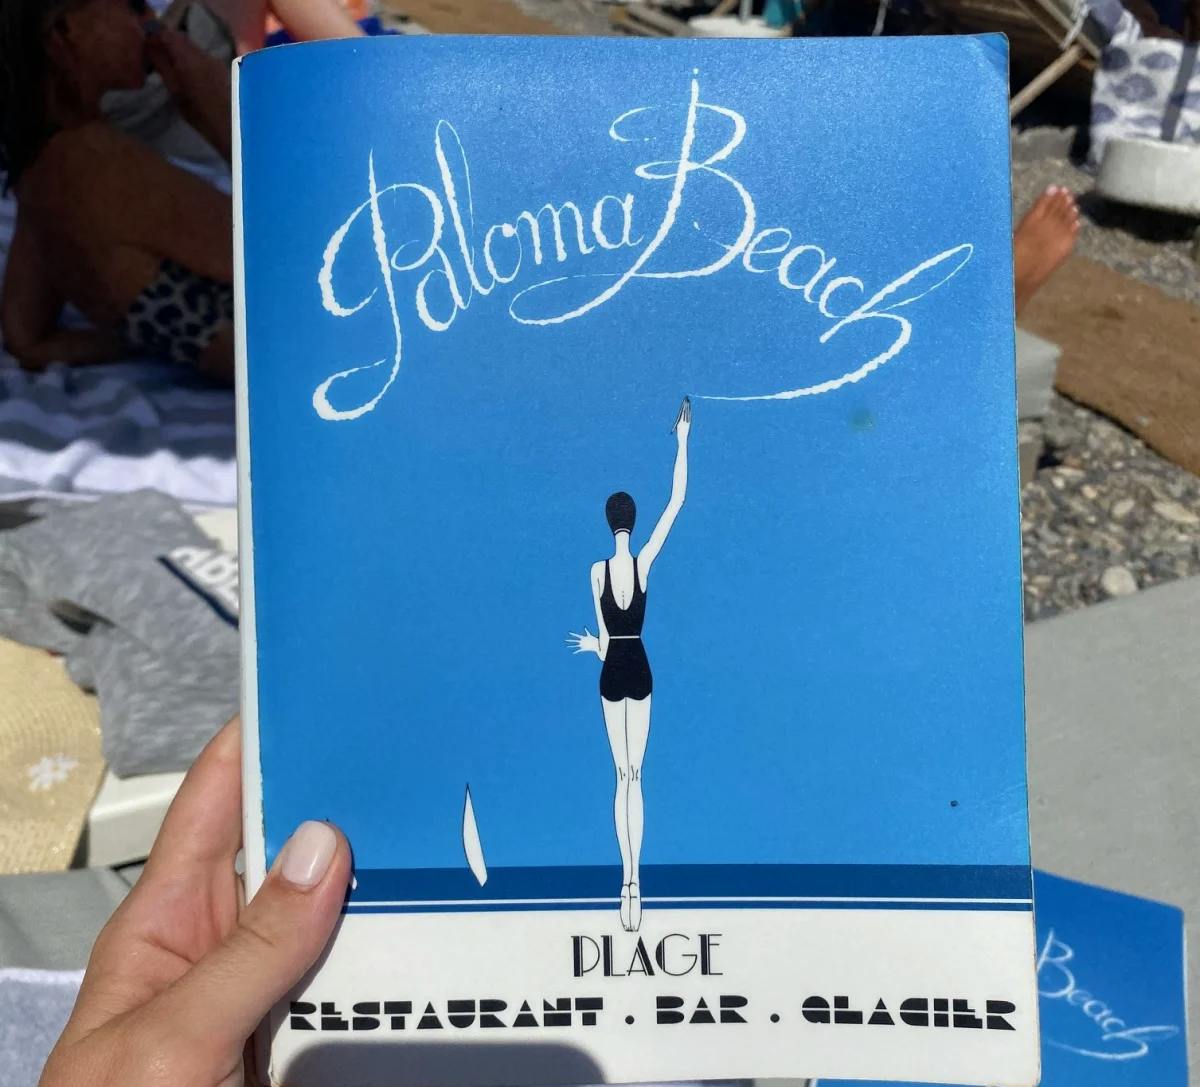 The image depicts a hand holding a book titled “Paloma Beach” with a beach scene in the background, evoking a leisurely atmosphere.